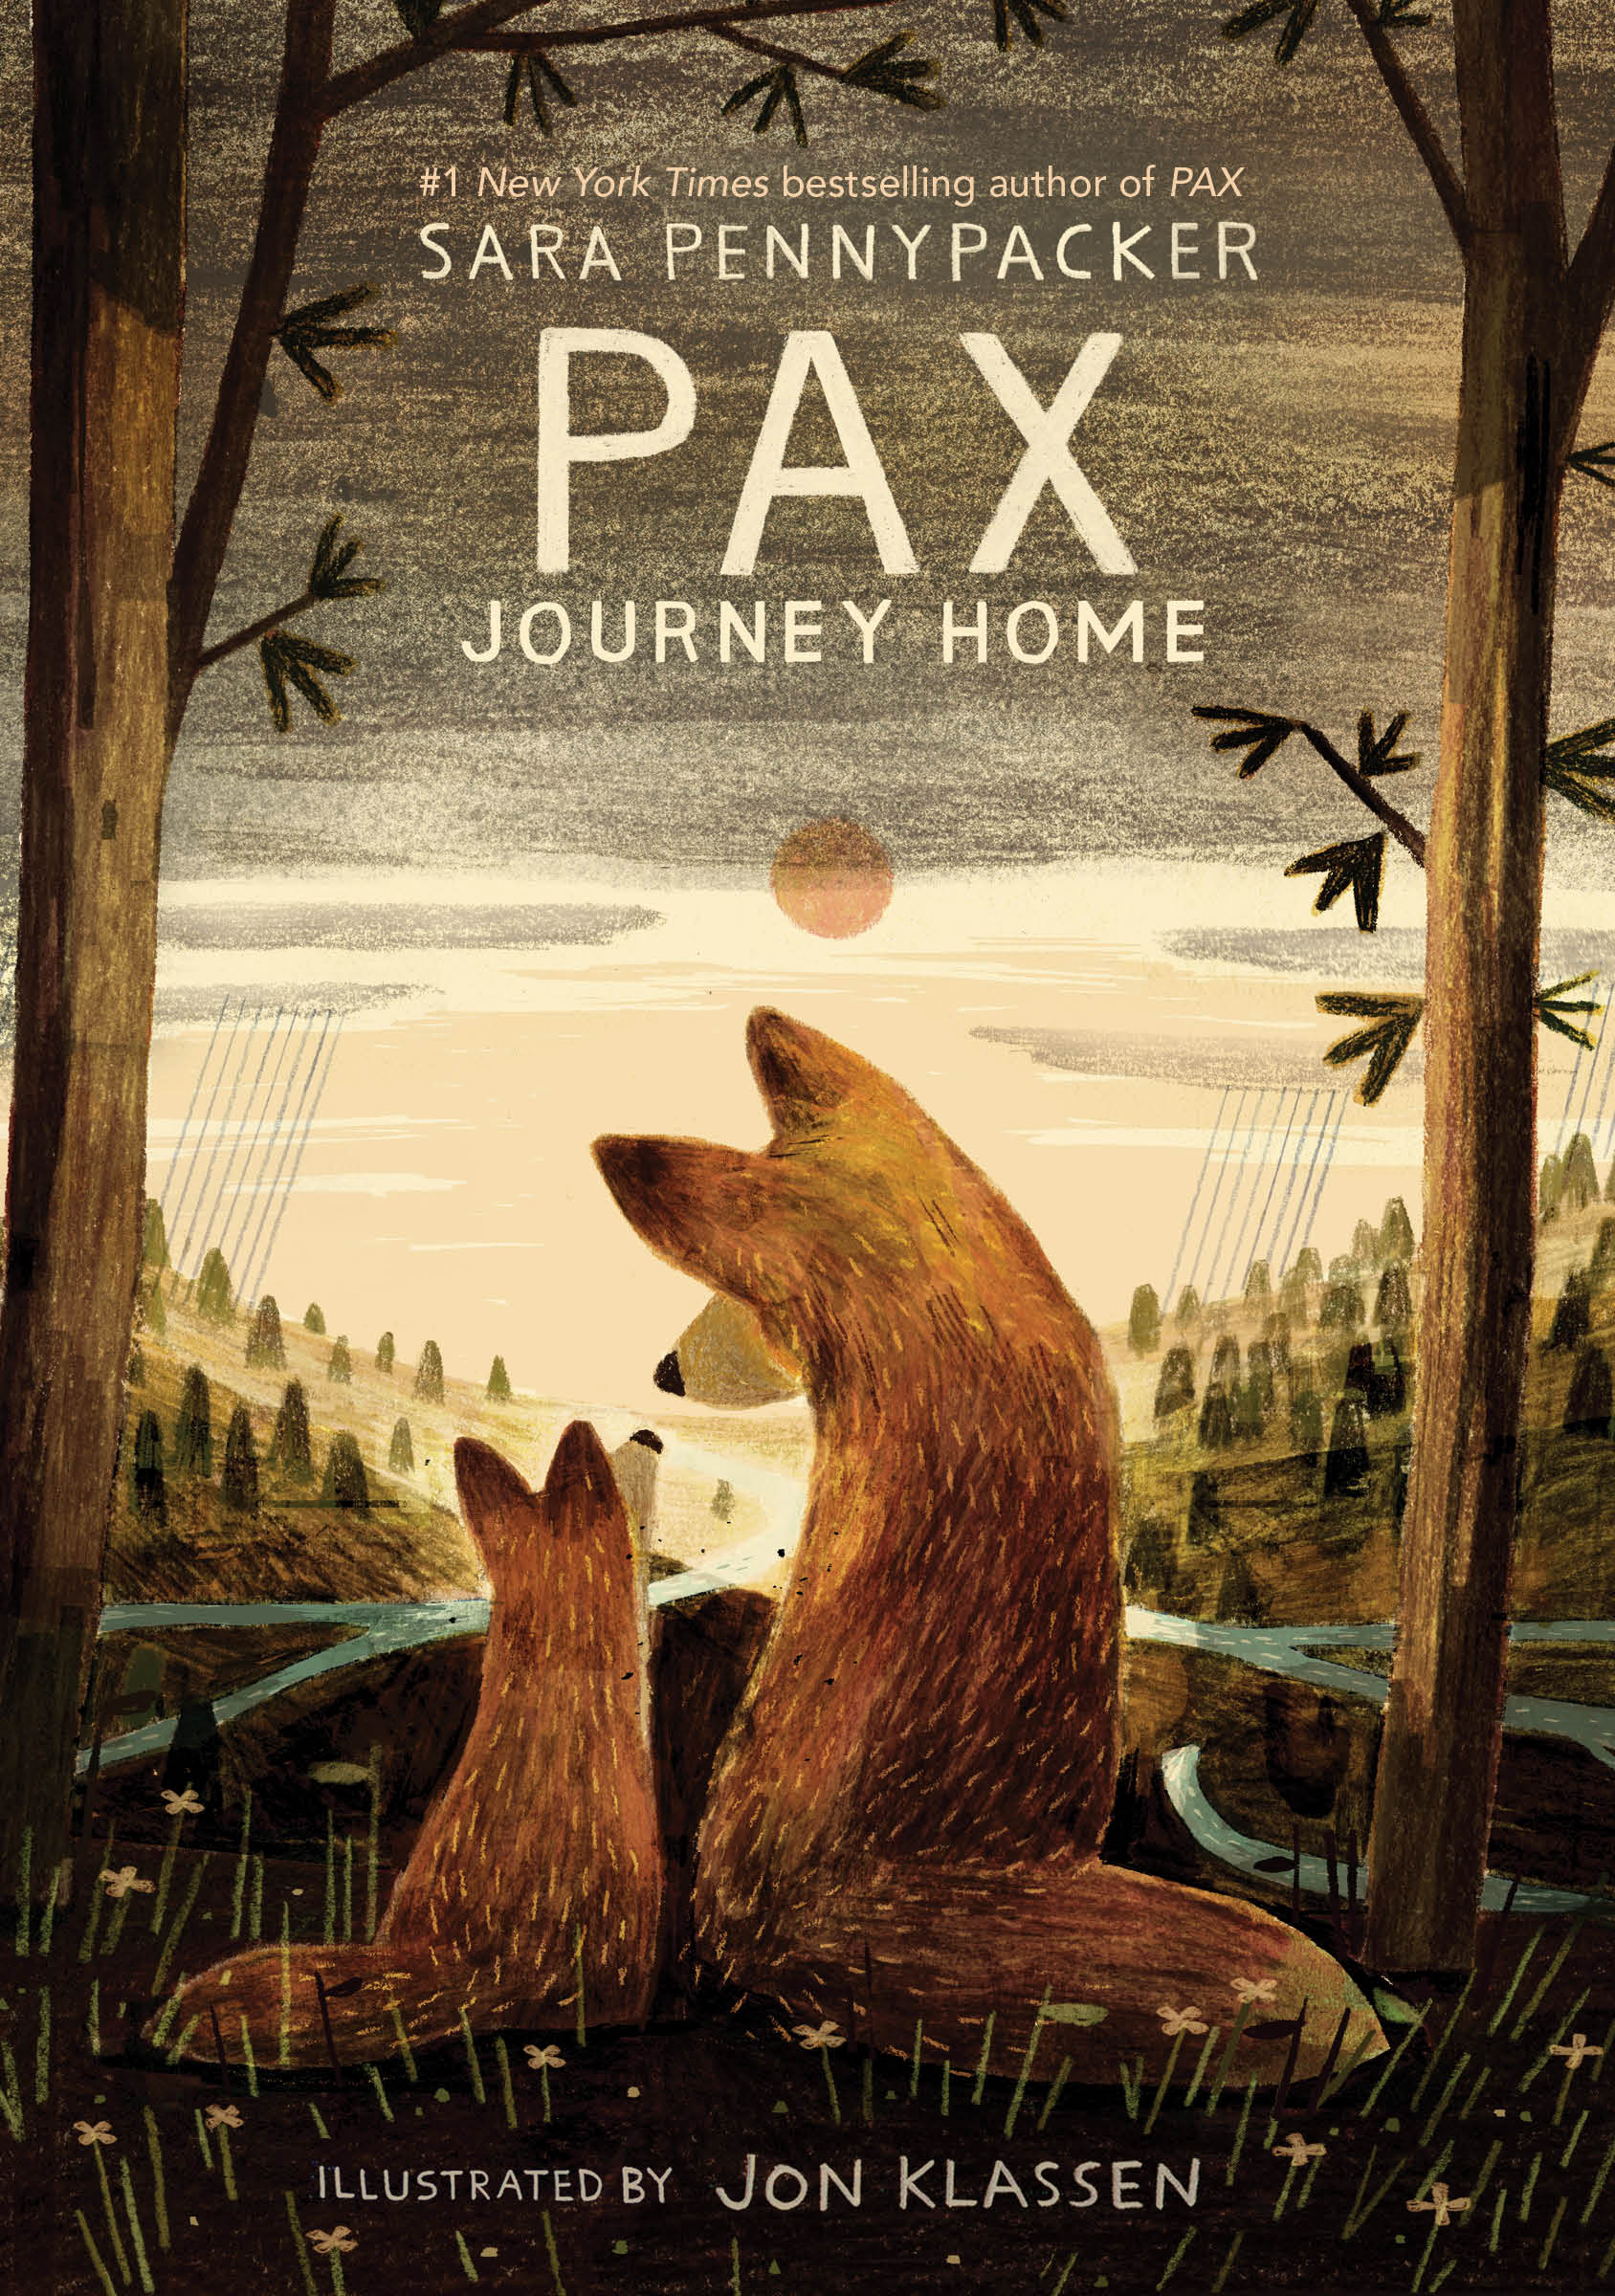 pax journey home characters